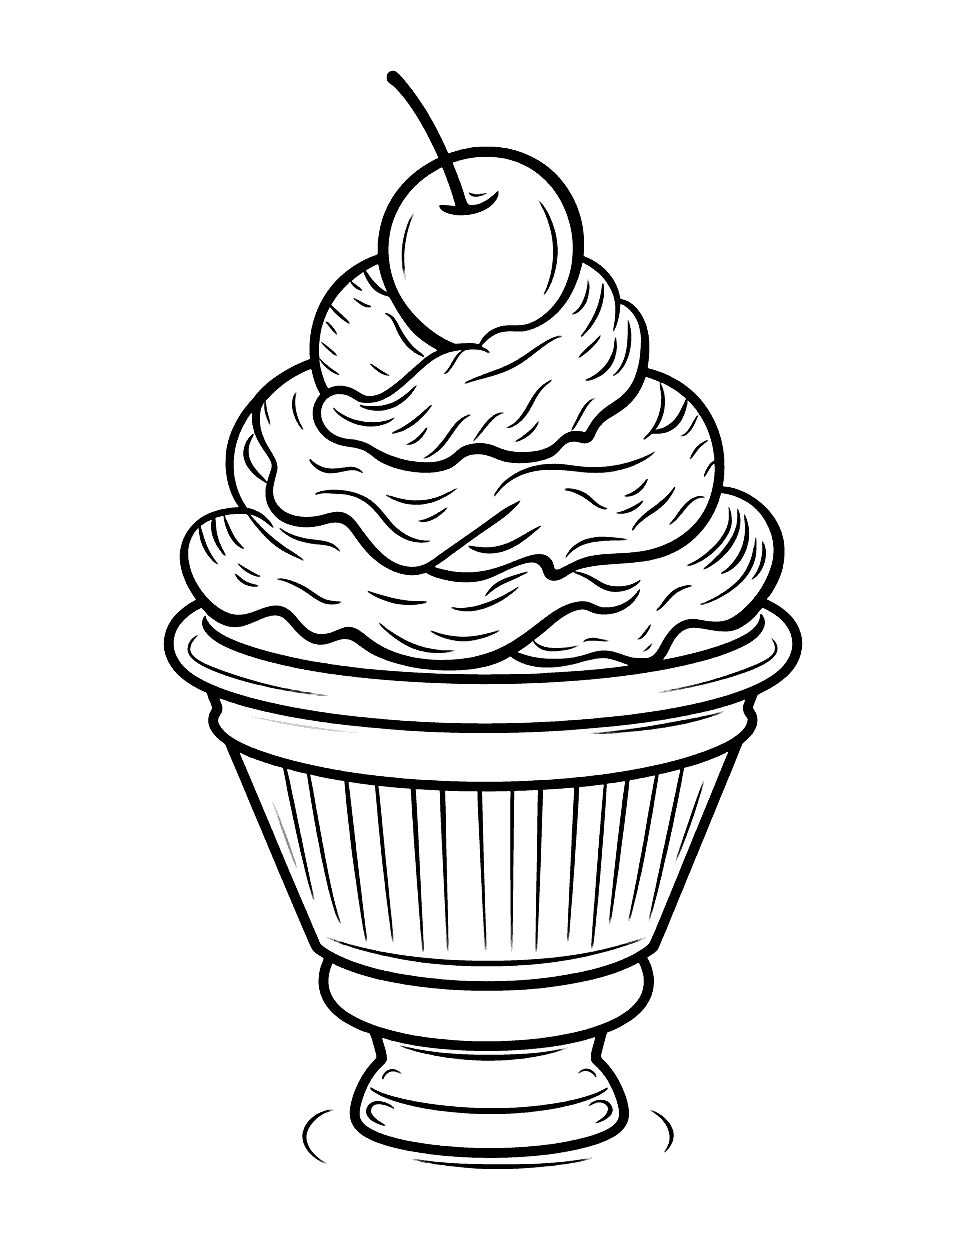 Cute Sundae Scene Ice Cream Coloring Page - An adorable ice cream sundae, complete with whipped cream and a cherry on top.